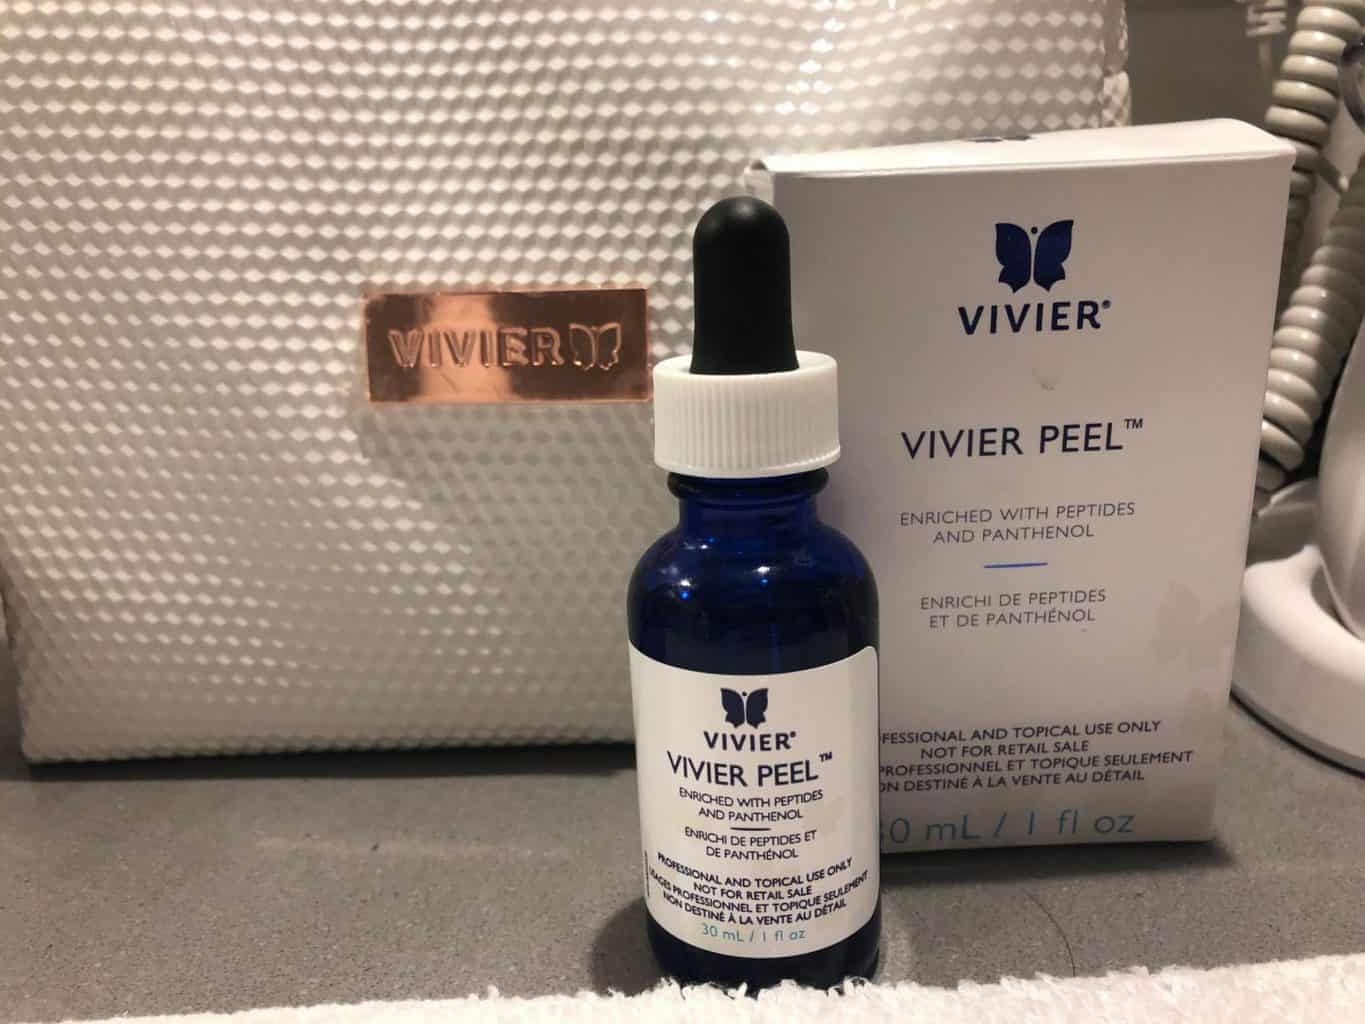 Introduction to Vivier Skincare and my First Chemical Peel